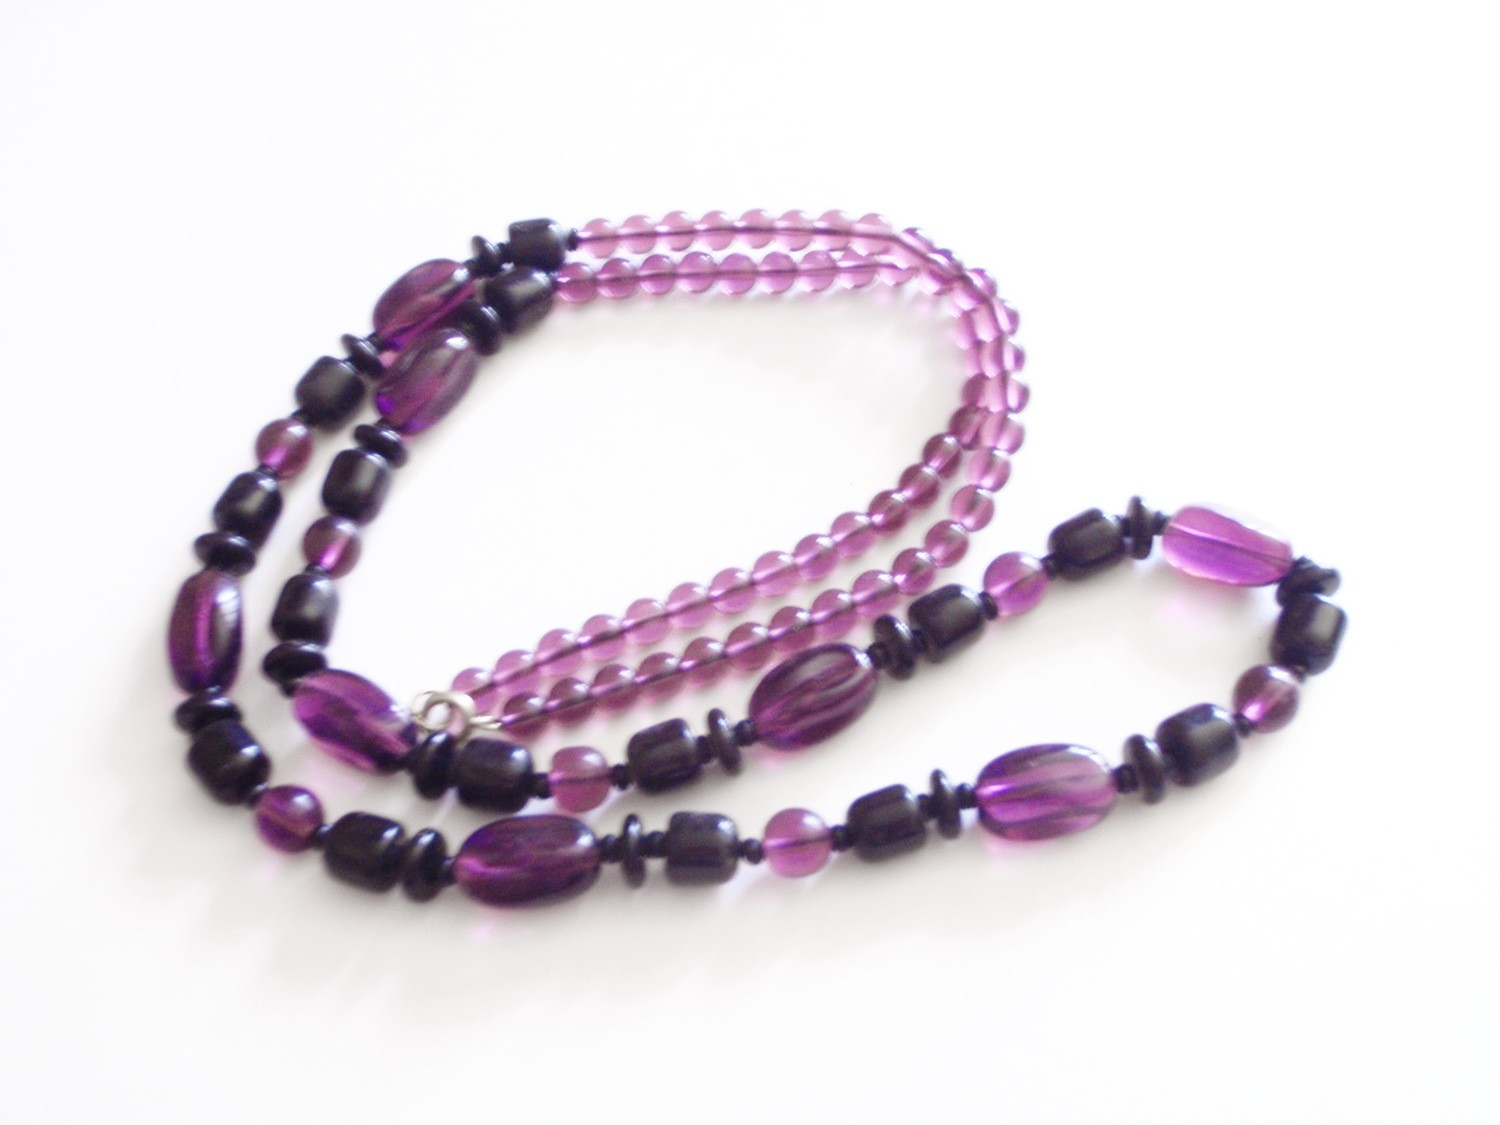 Vintage 1970's Amethyst Onyx Beaded Necklace 30 Inch